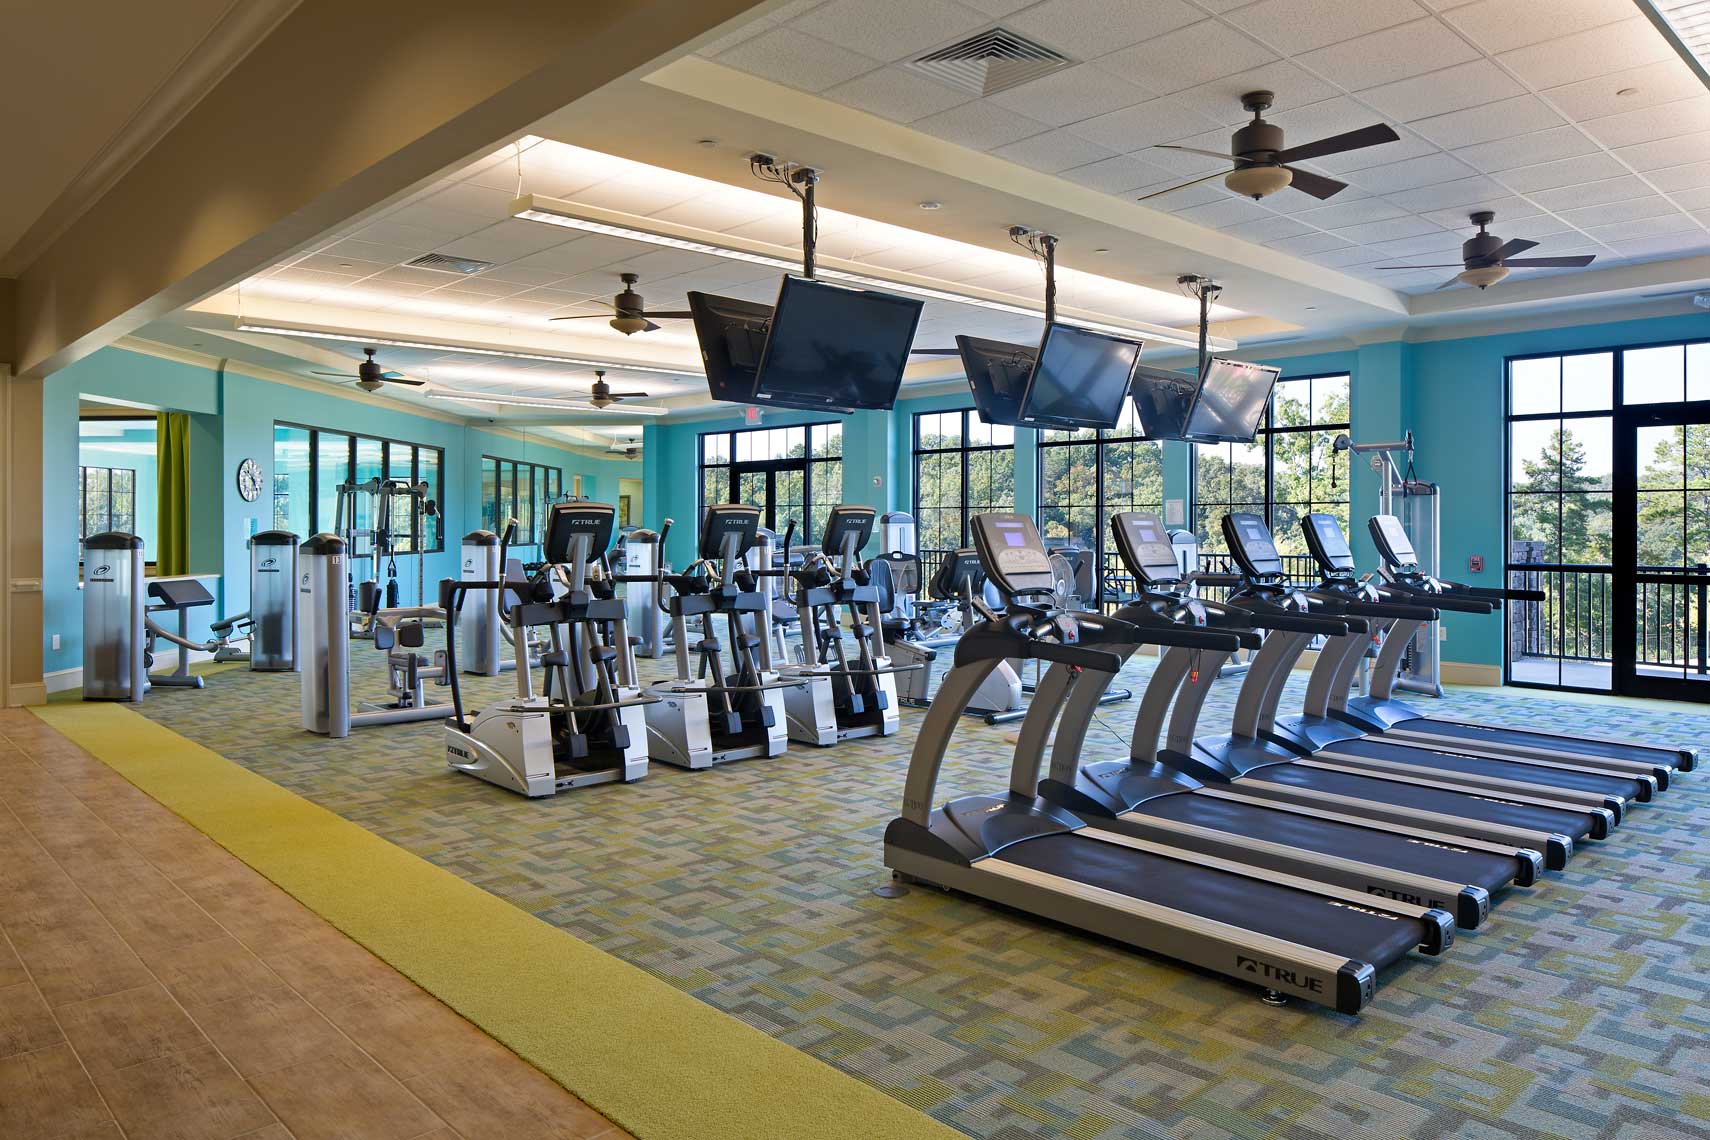 Cresswind at Lake Lanier | Fitness Center<br>Edwards Construction Services / McMillan Pazdan Smith Architects